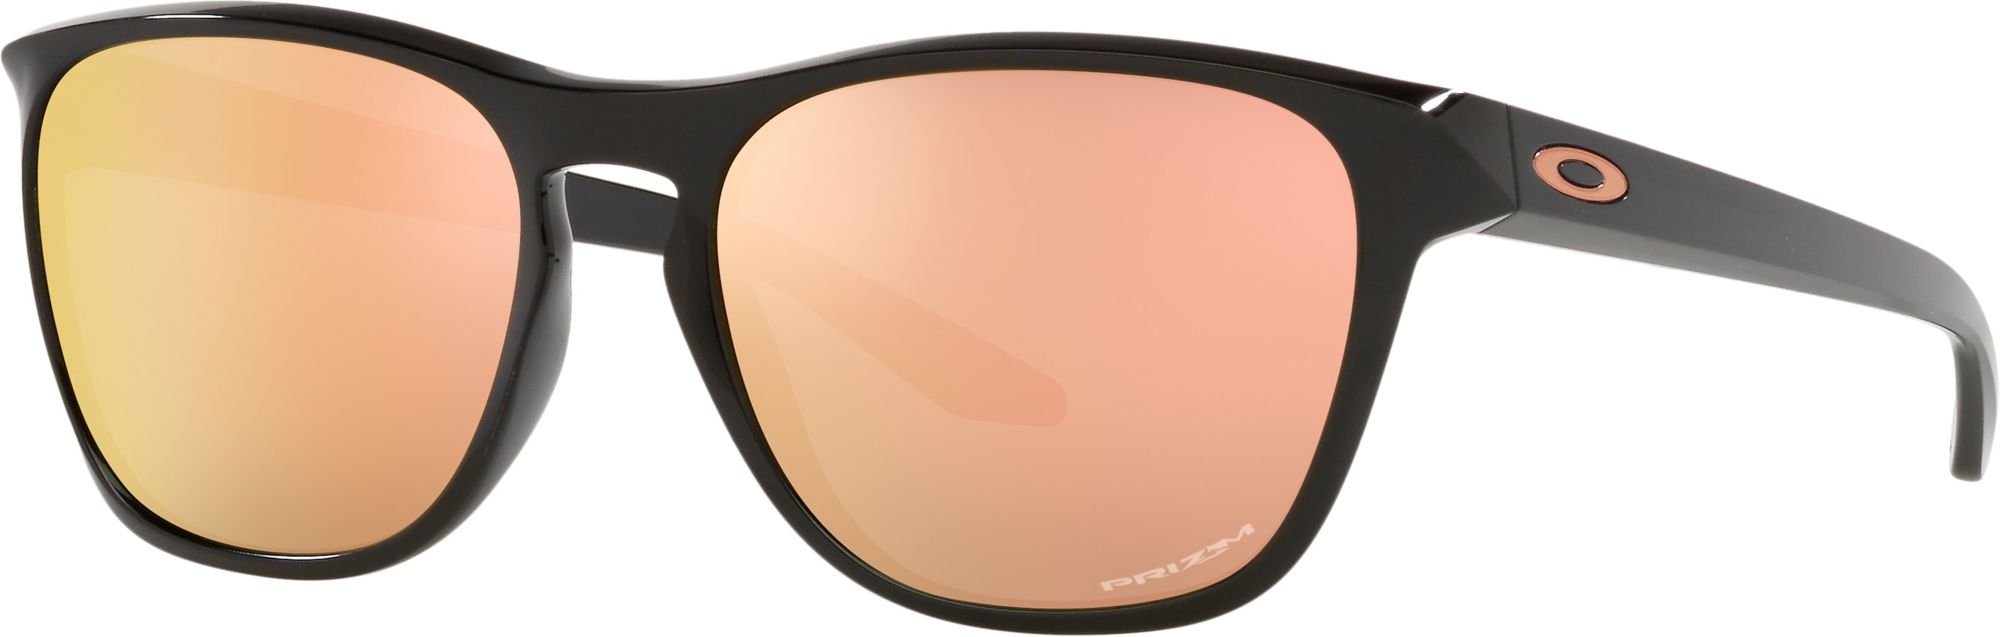 Photos - Sunglasses Oakley Men's Manorburn , Black/Rose Gold | Father's Day Gift Ide 